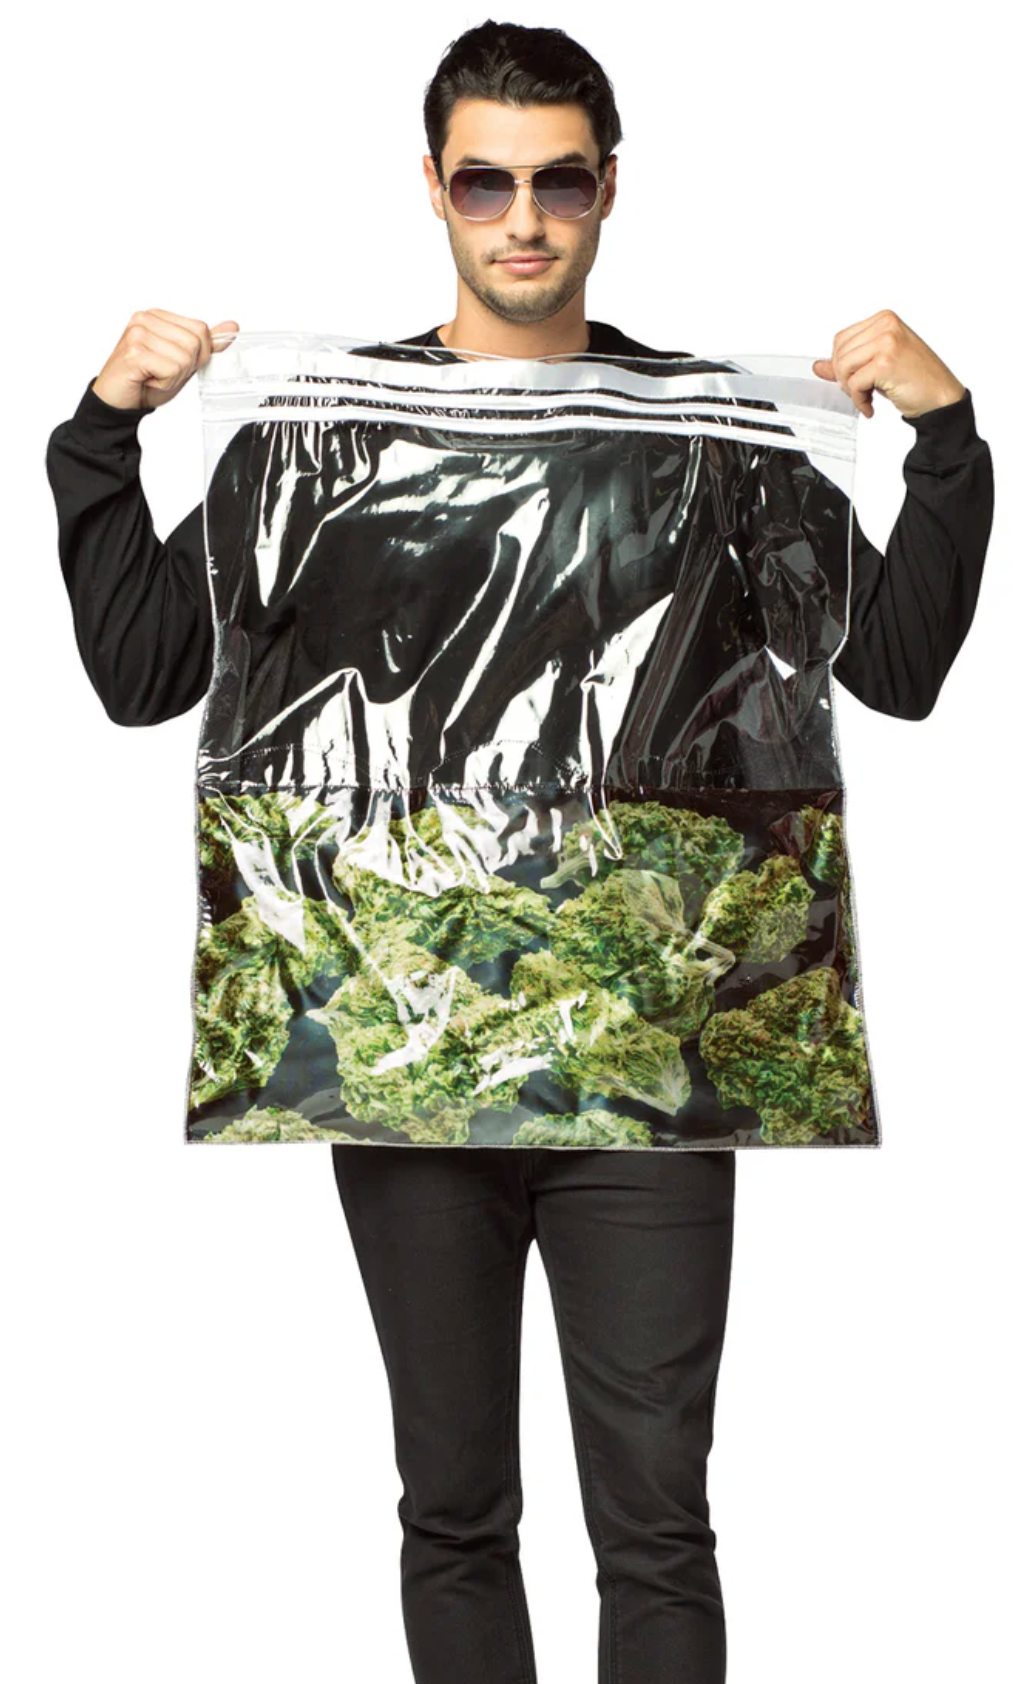 A Bold Statement: Bag of Weed Costume